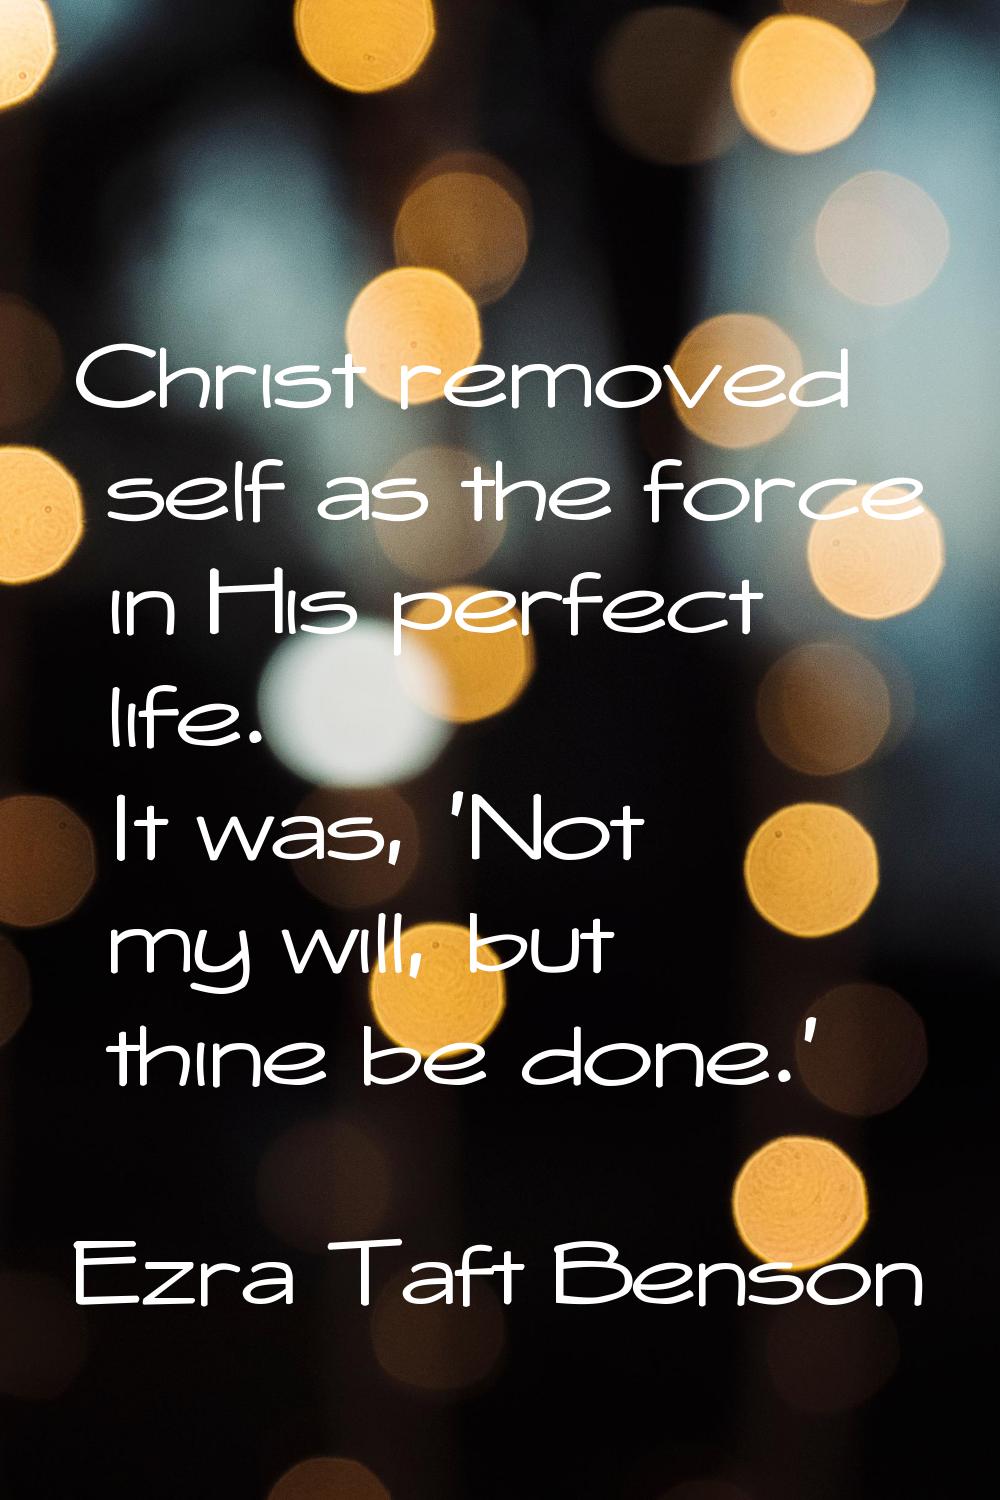 Christ removed self as the force in His perfect life. It was, 'Not my will, but thine be done.'